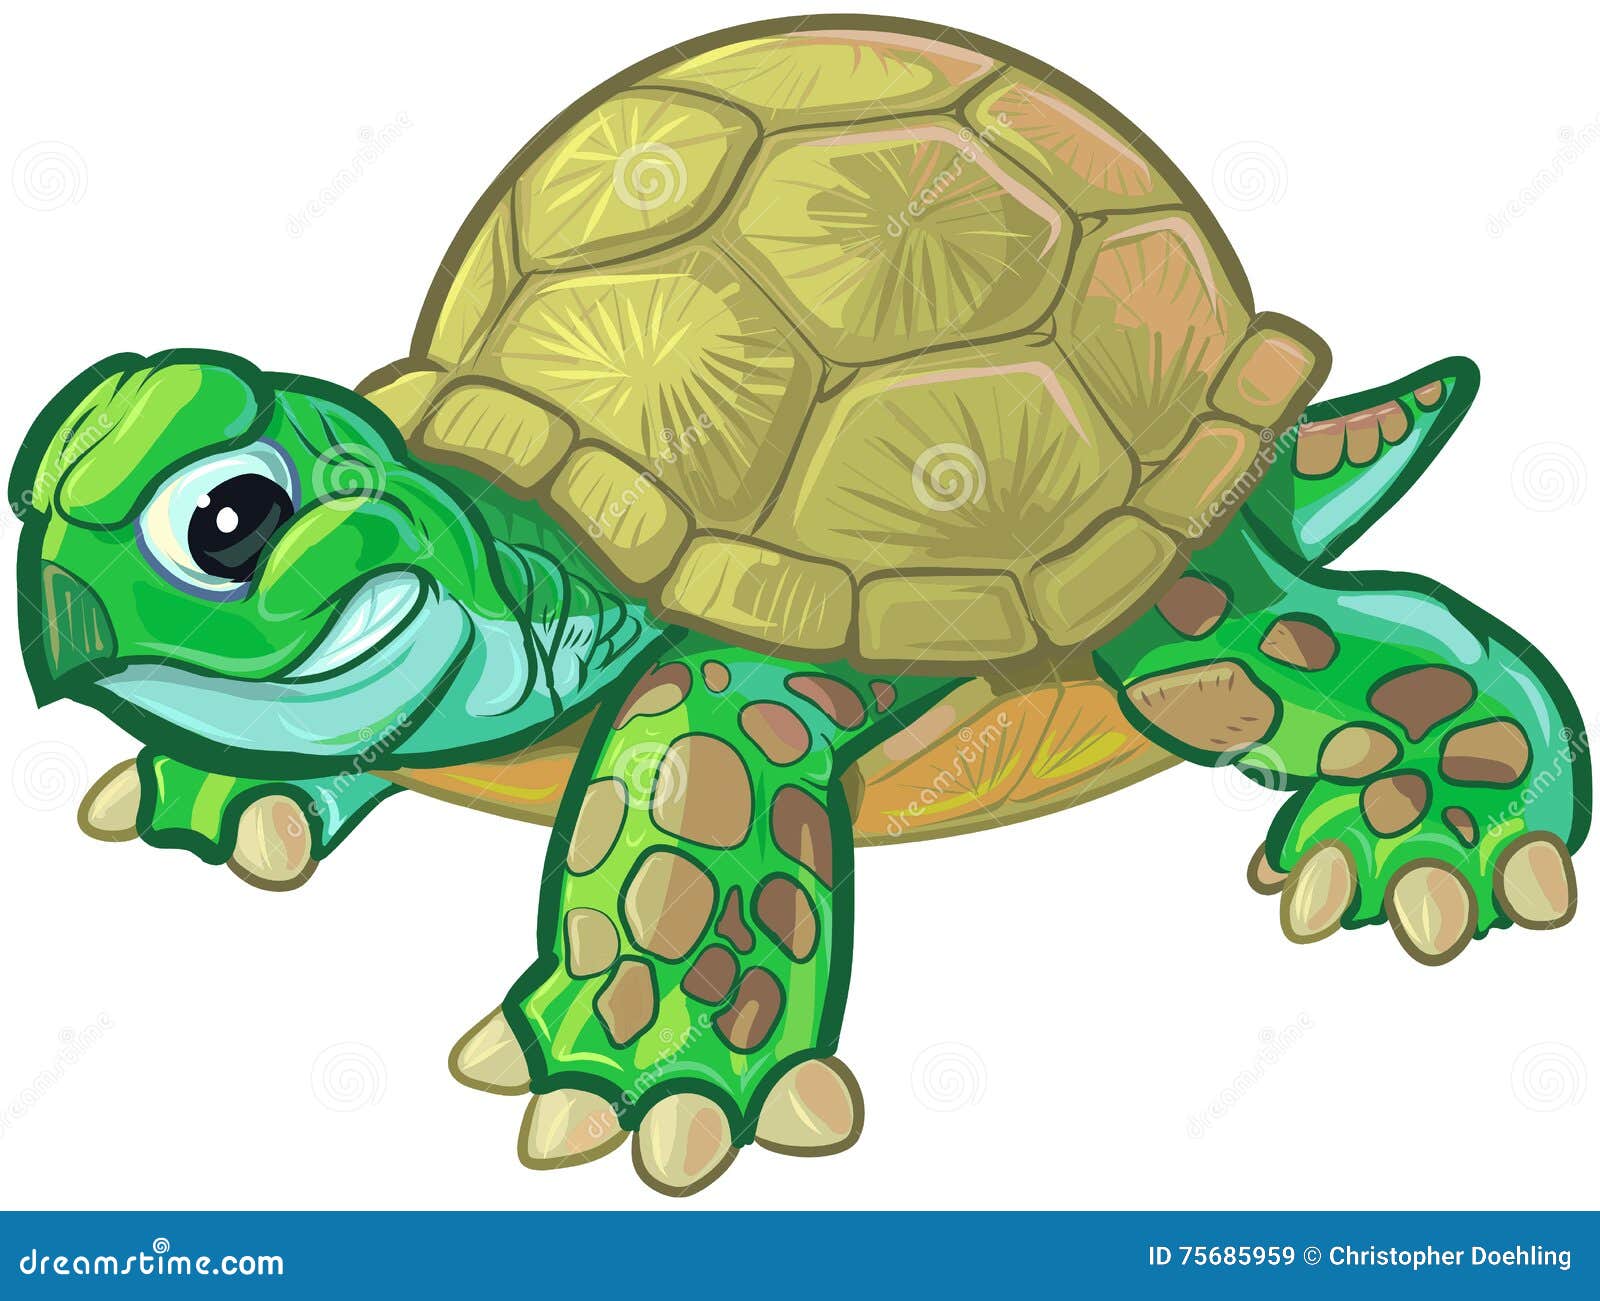 girl turtle clipart - photo #49